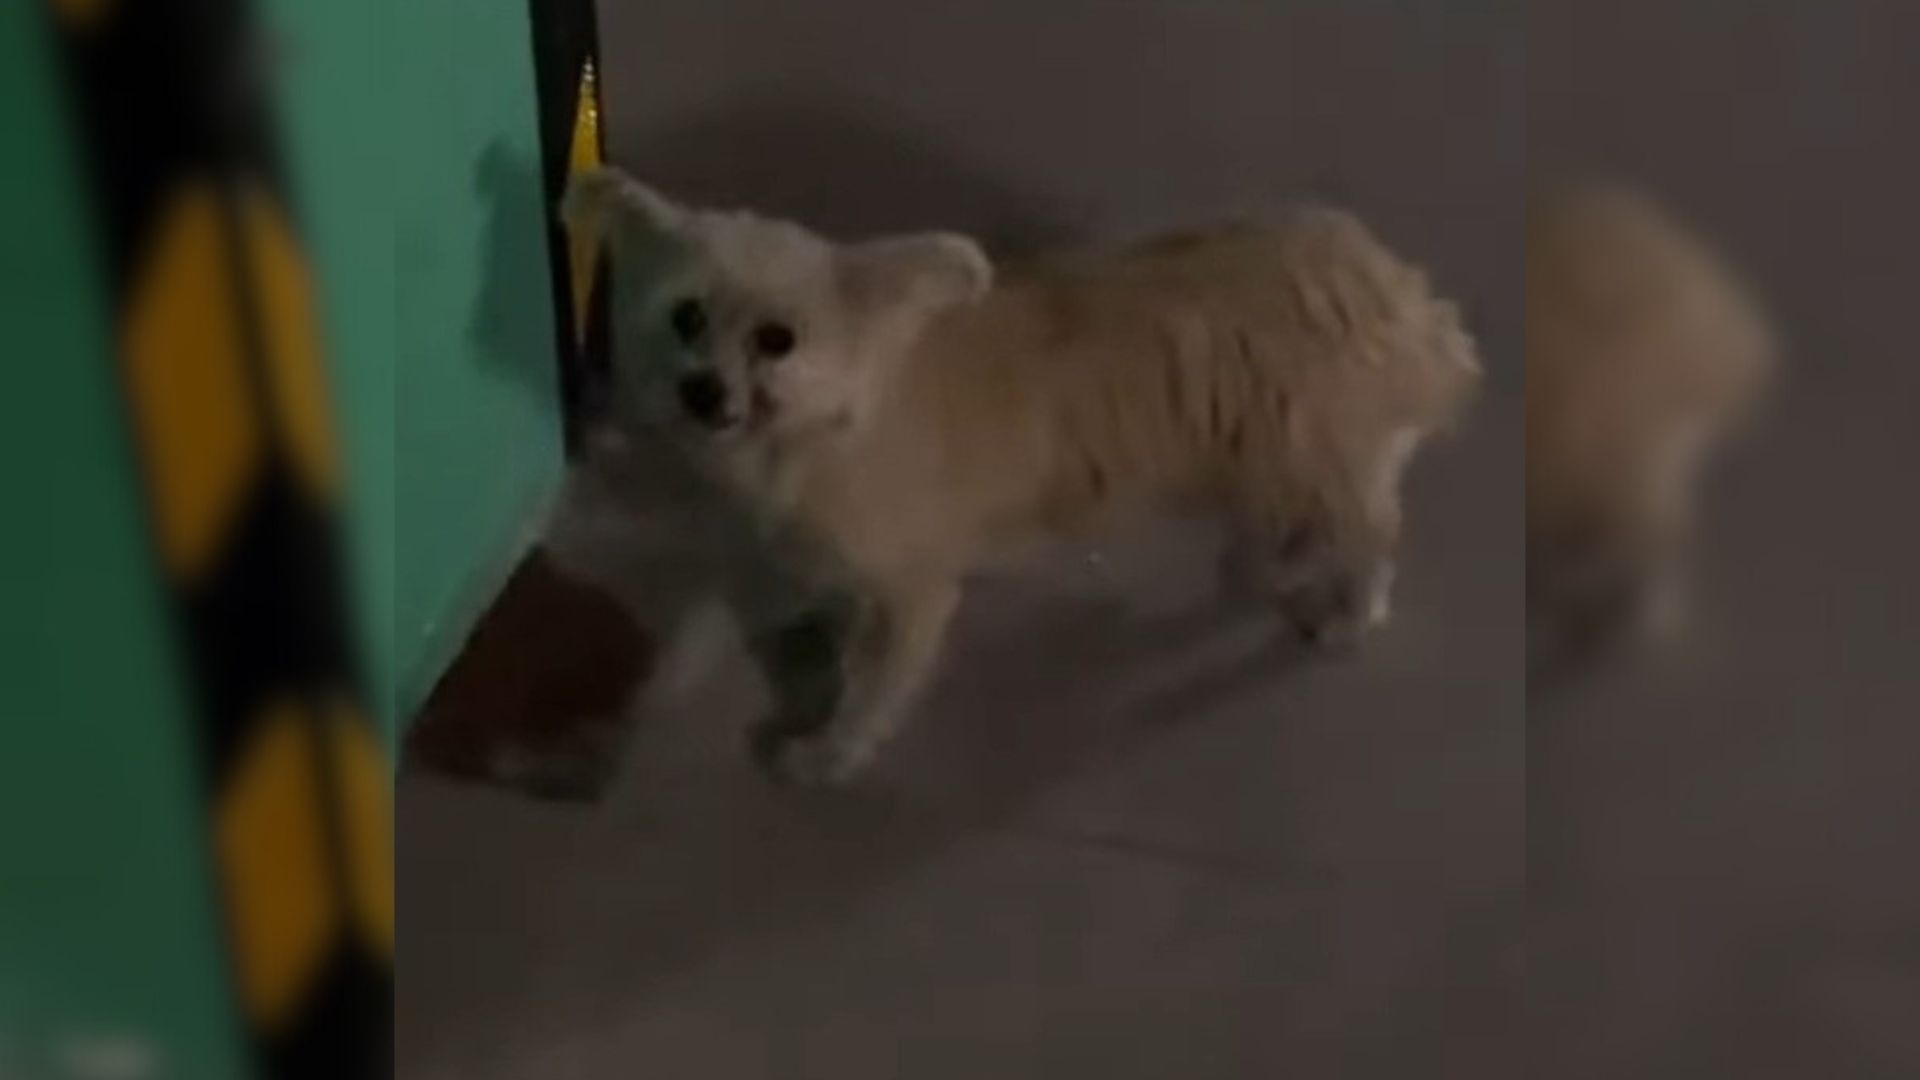 Rescuer Was Just Walking Her Dog When She Noticed A Stray Dog In The Parking Garage